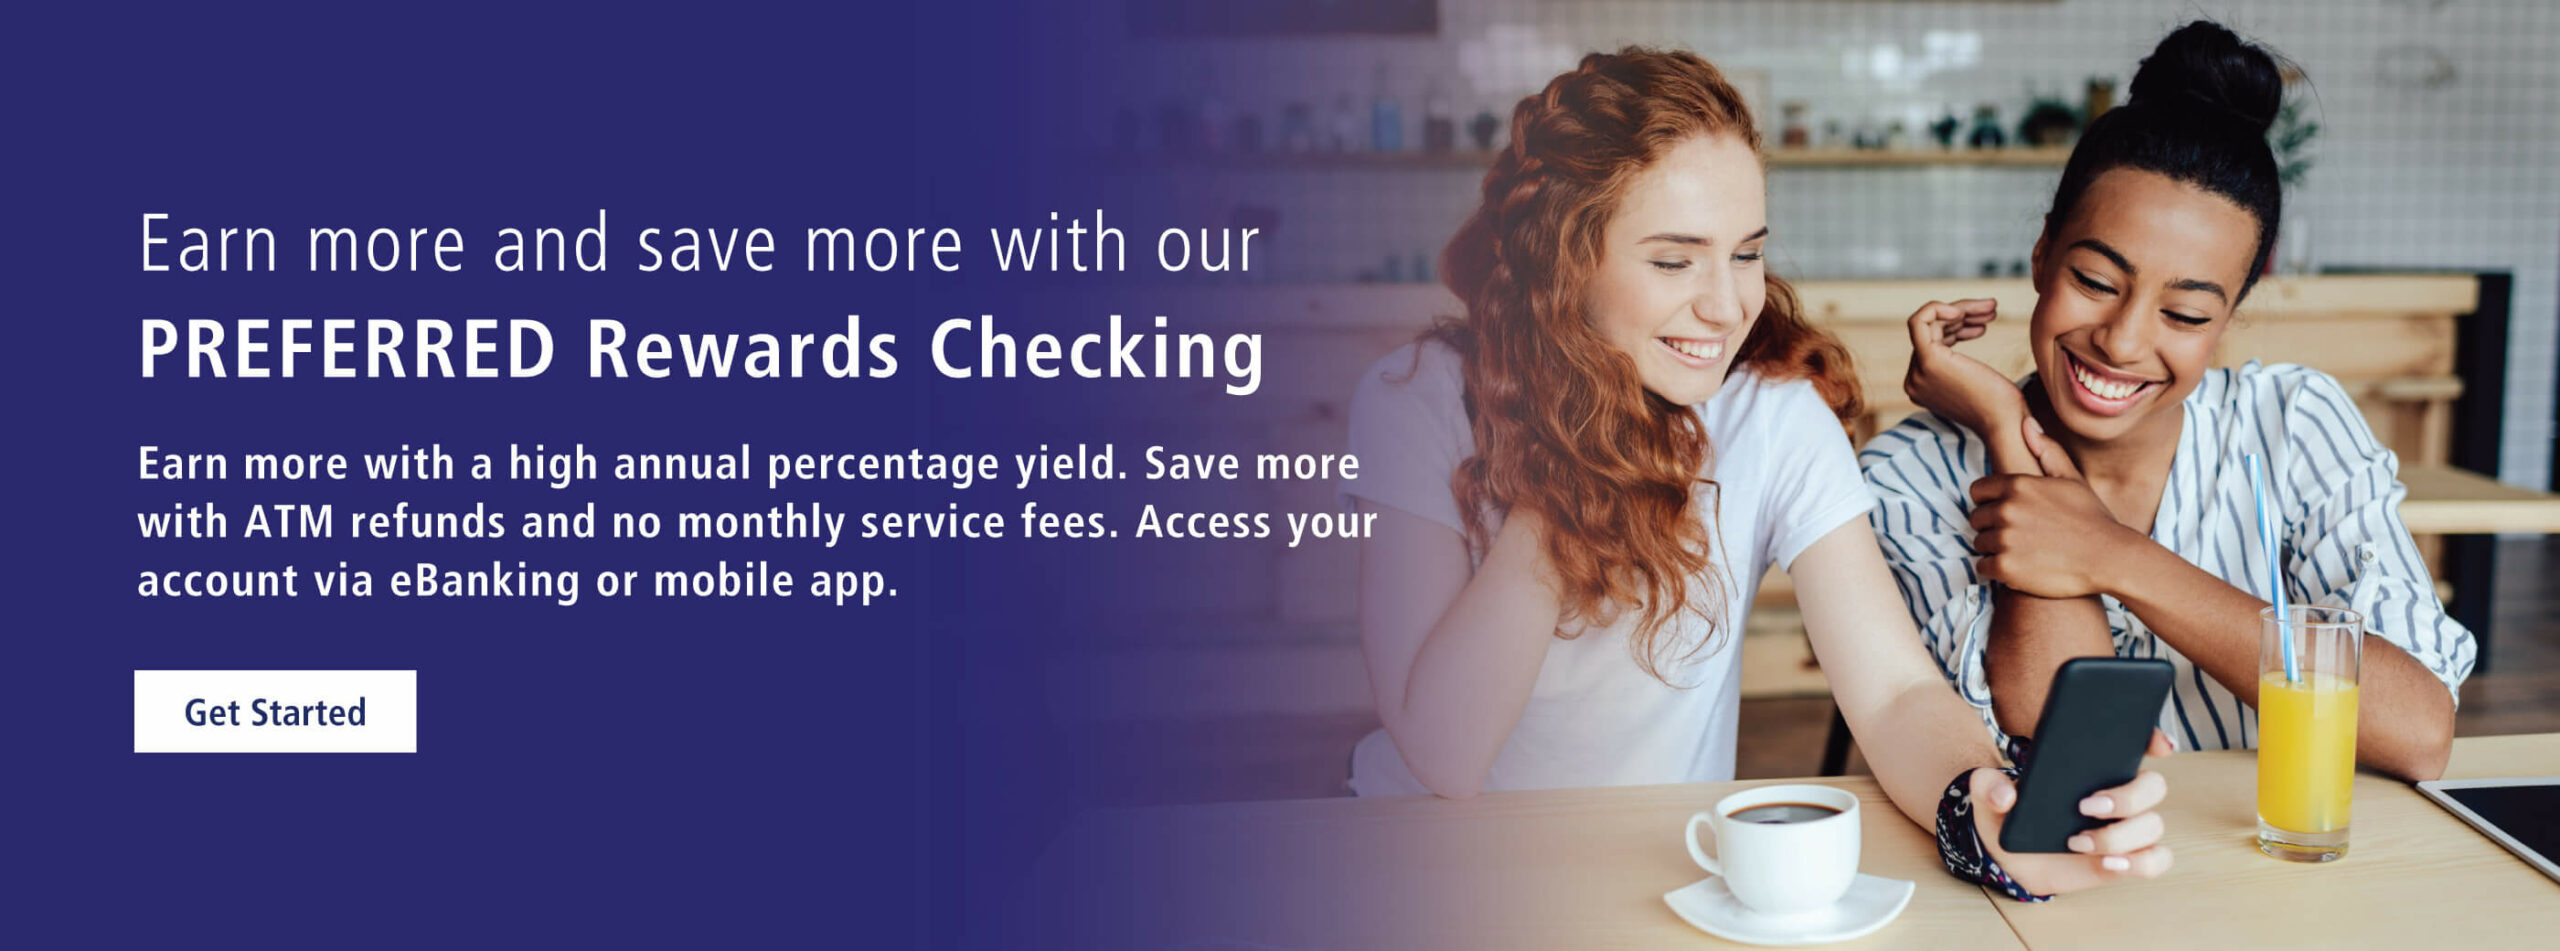 Two friends looking at their phone with text, "Earn More and save more with Rewards Checking"